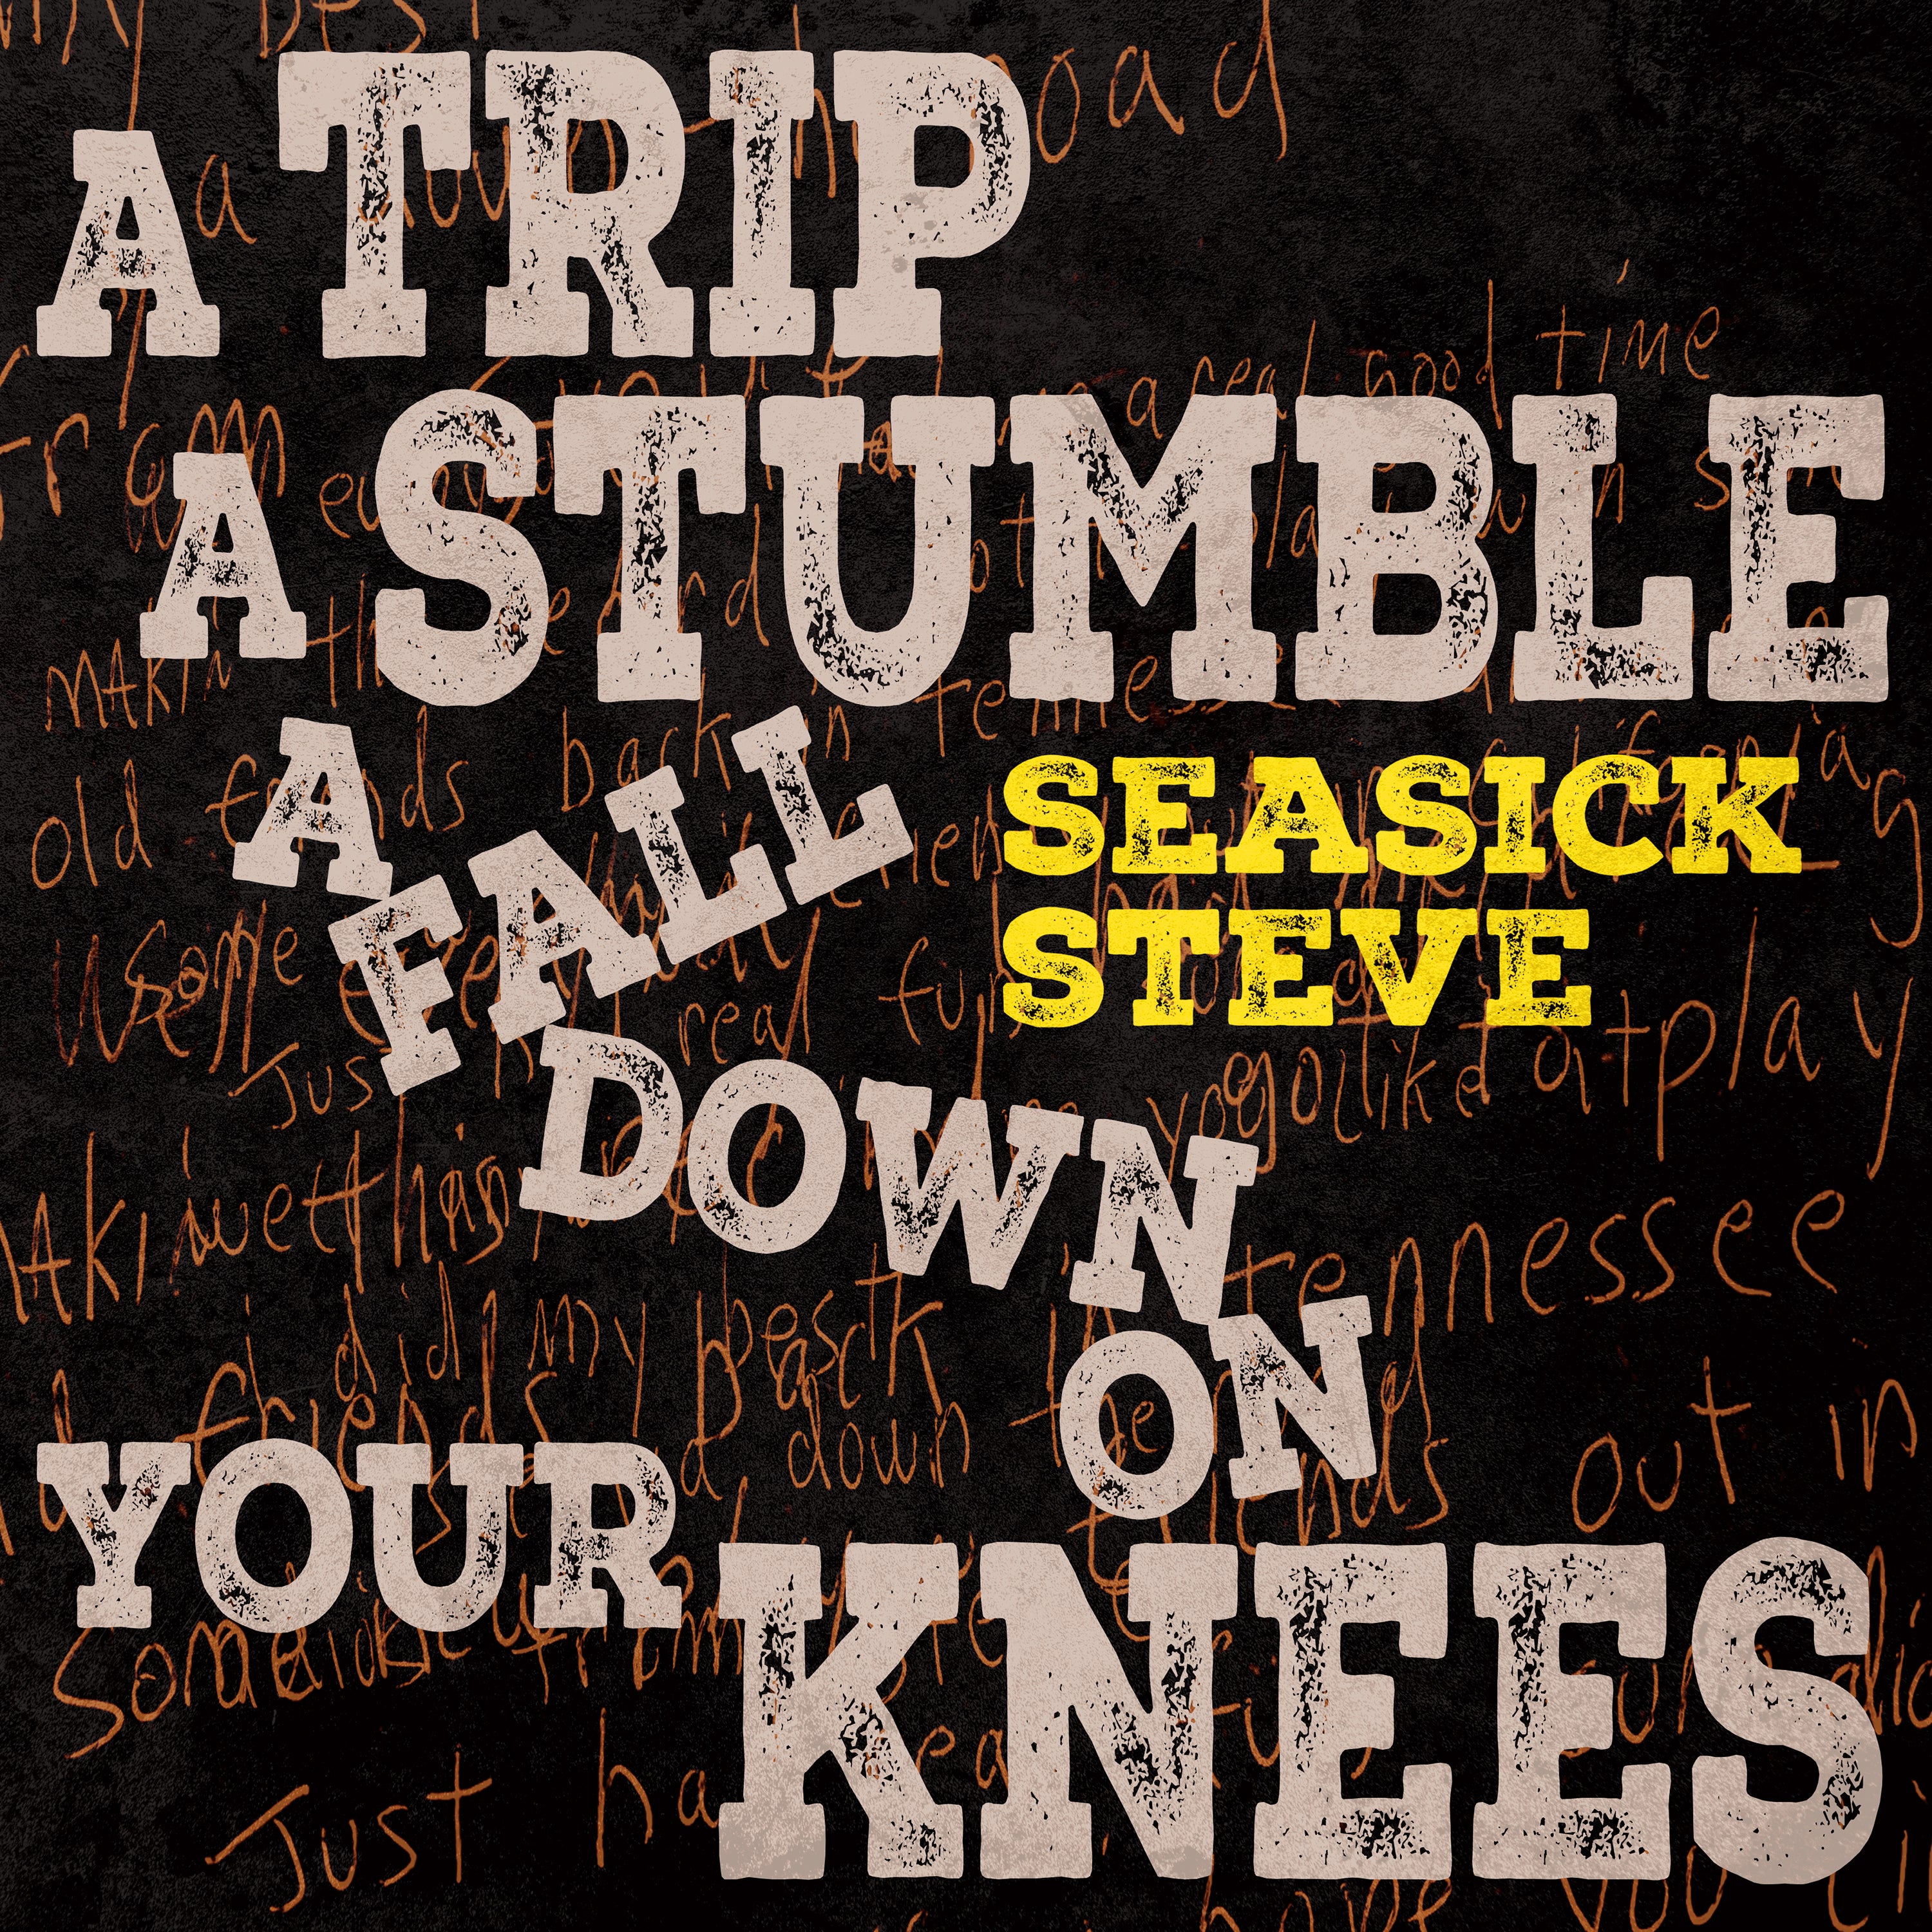 Seasick Steve - A Trip, A Stumble, A Fall Down On Your Knees: 'Canary Yellow' Vinyl LP